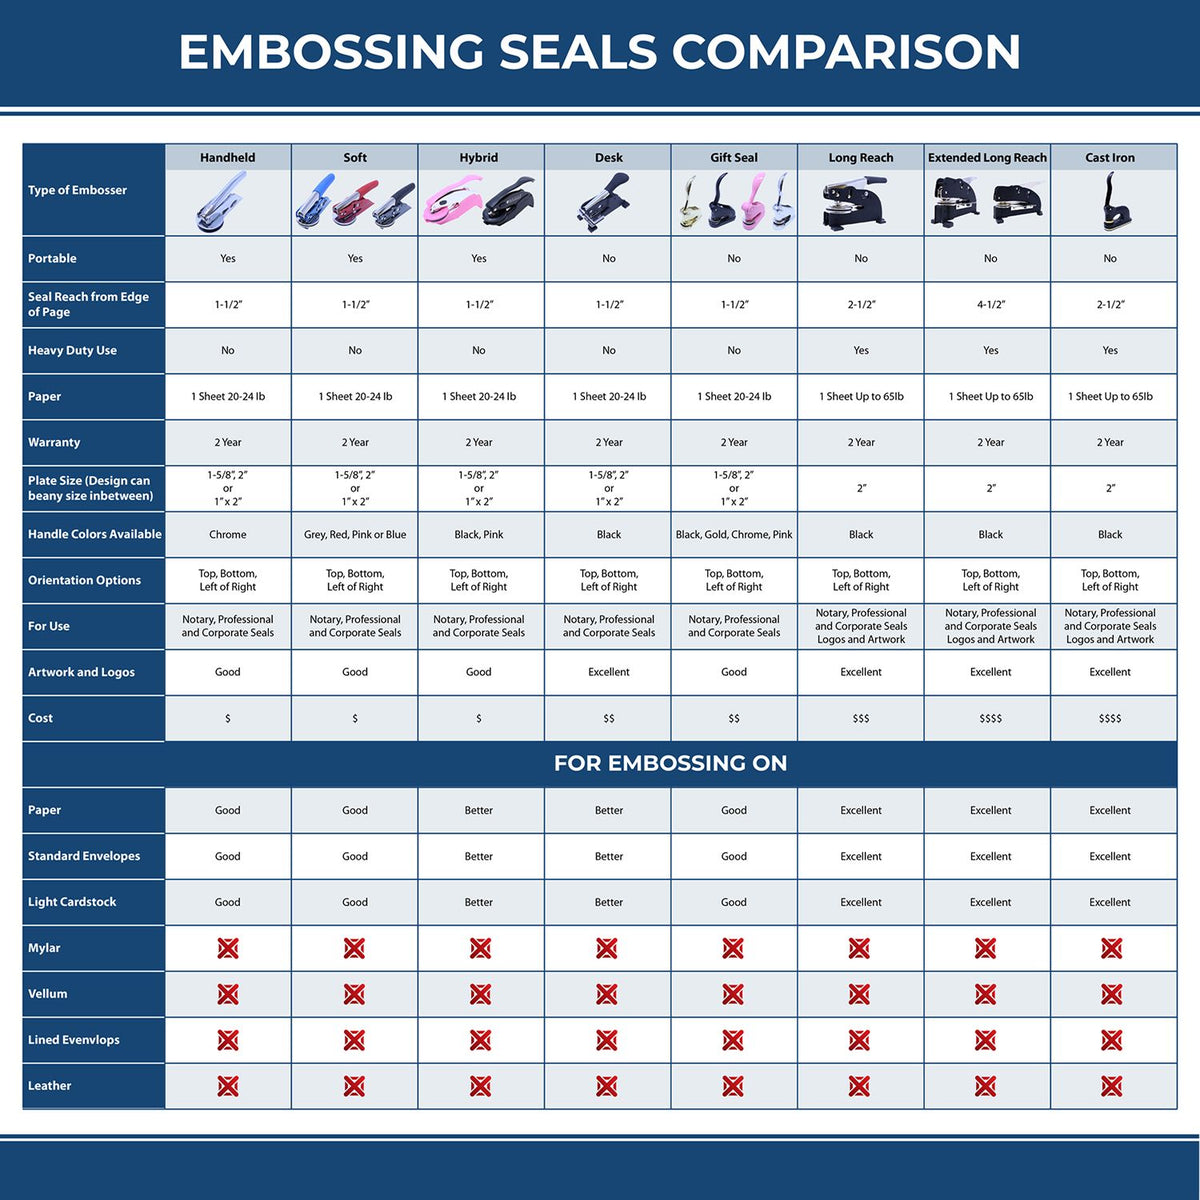 A comparison chart for the different types of mount models available for the Hybrid West Virginia Engineer Seal